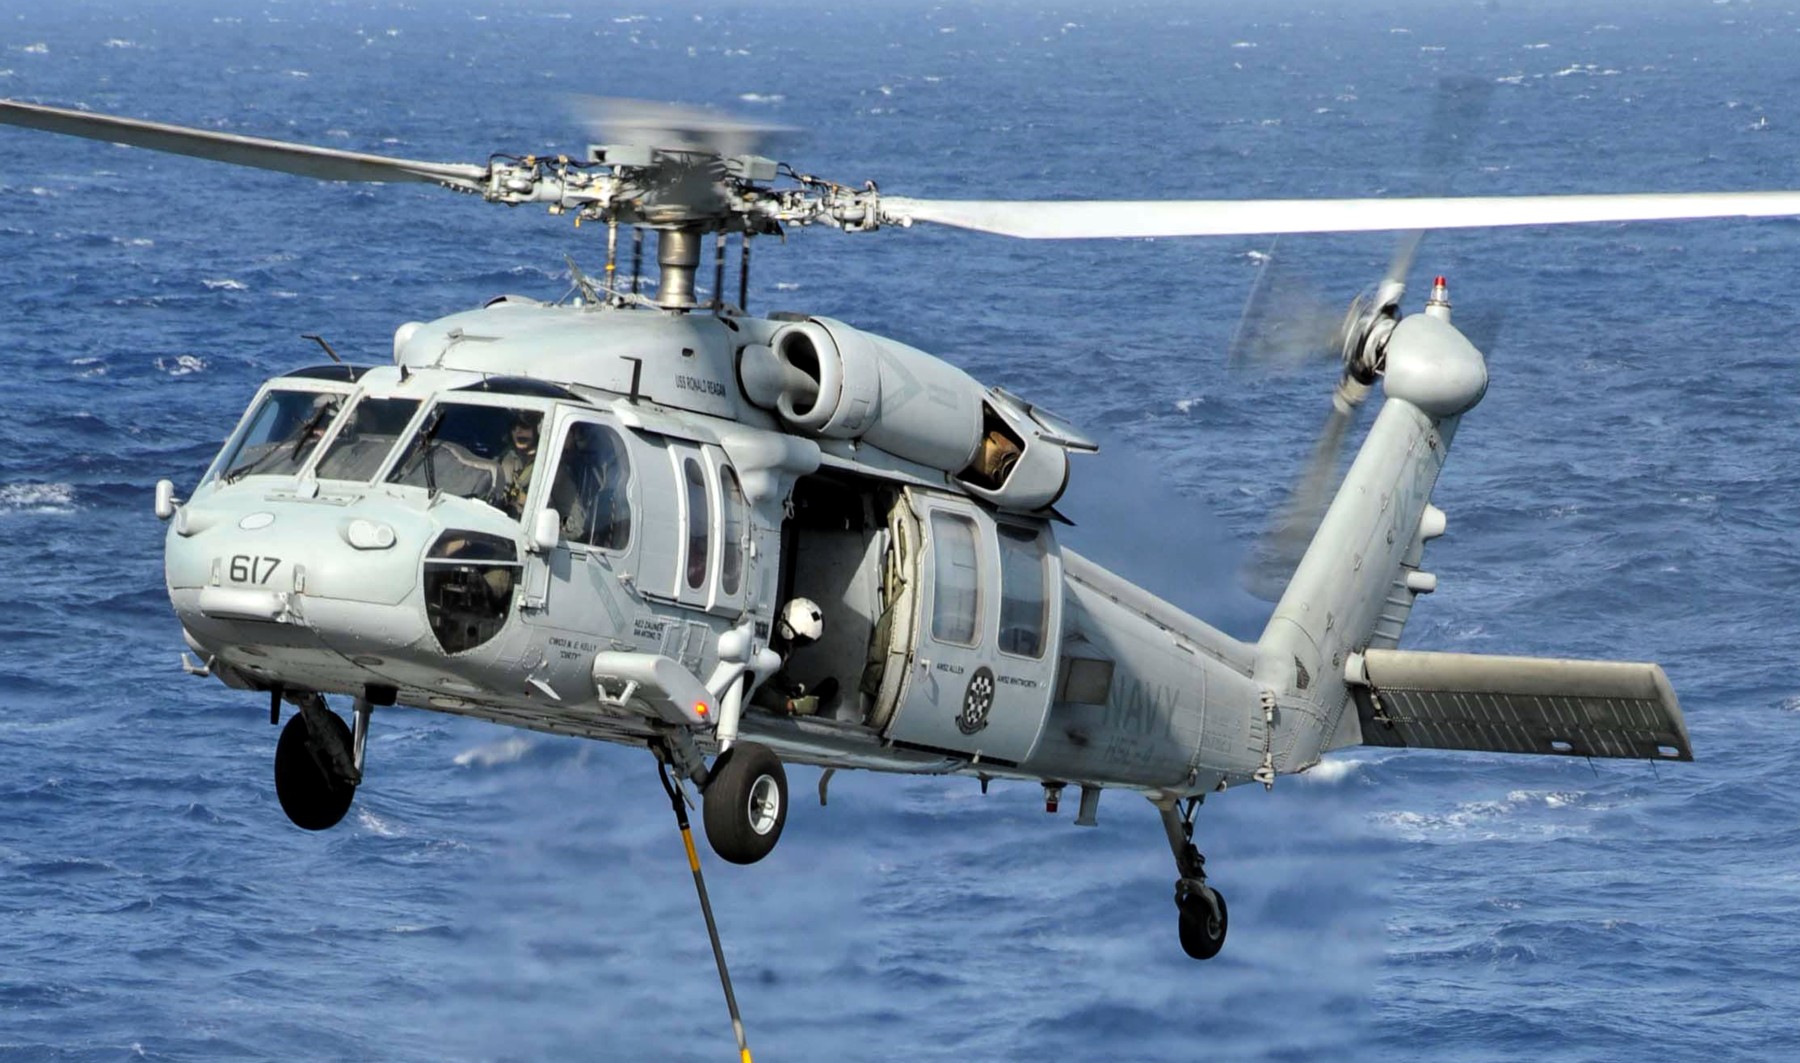 hsc-4 black knights helicopter sea combat squadron us navy mh-60s seahawk 2014 35